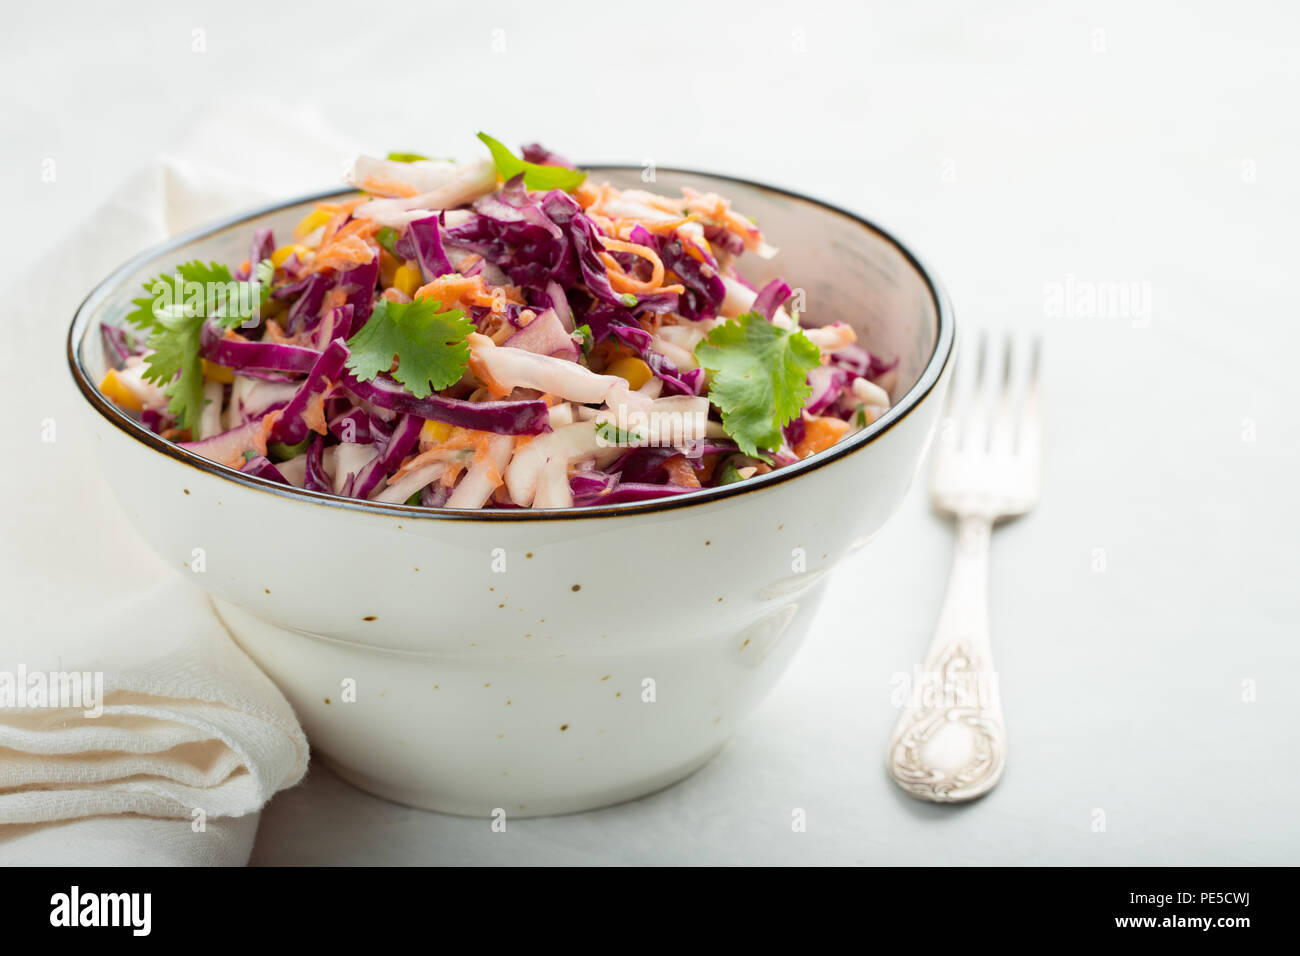 Purple cabbage and carrot salad with mayonnaise in a white bowl on a light background. Classic coleslaw. Diet vegetarian dish. Copy space Stock Photo